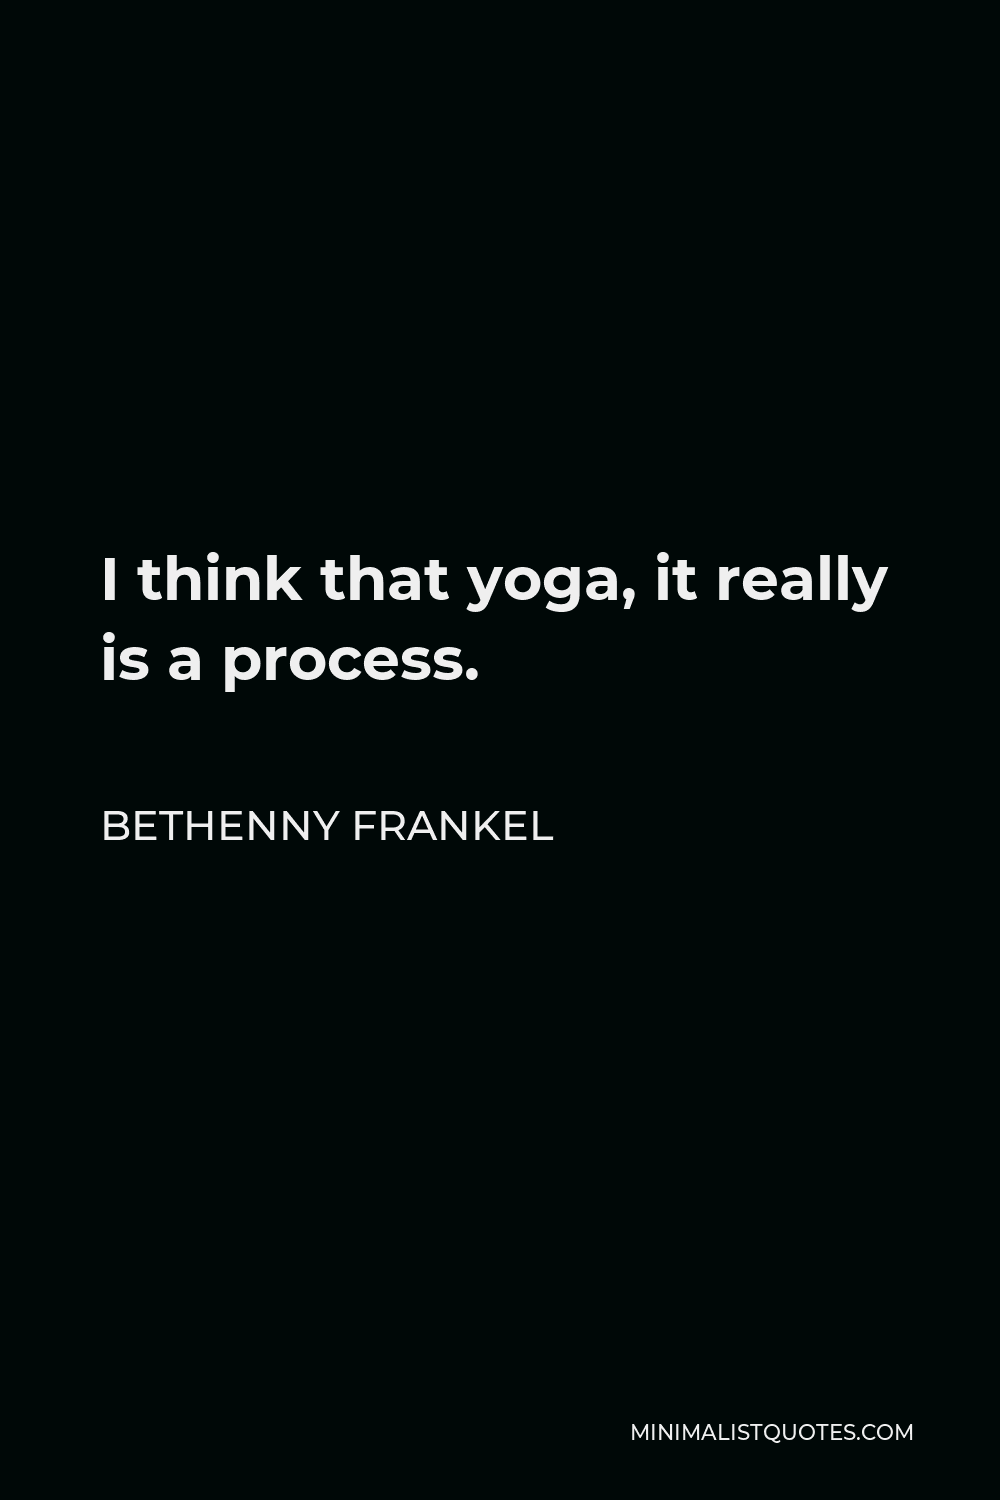 Bethenny Frankel Quote - I think that yoga, it really is a process.